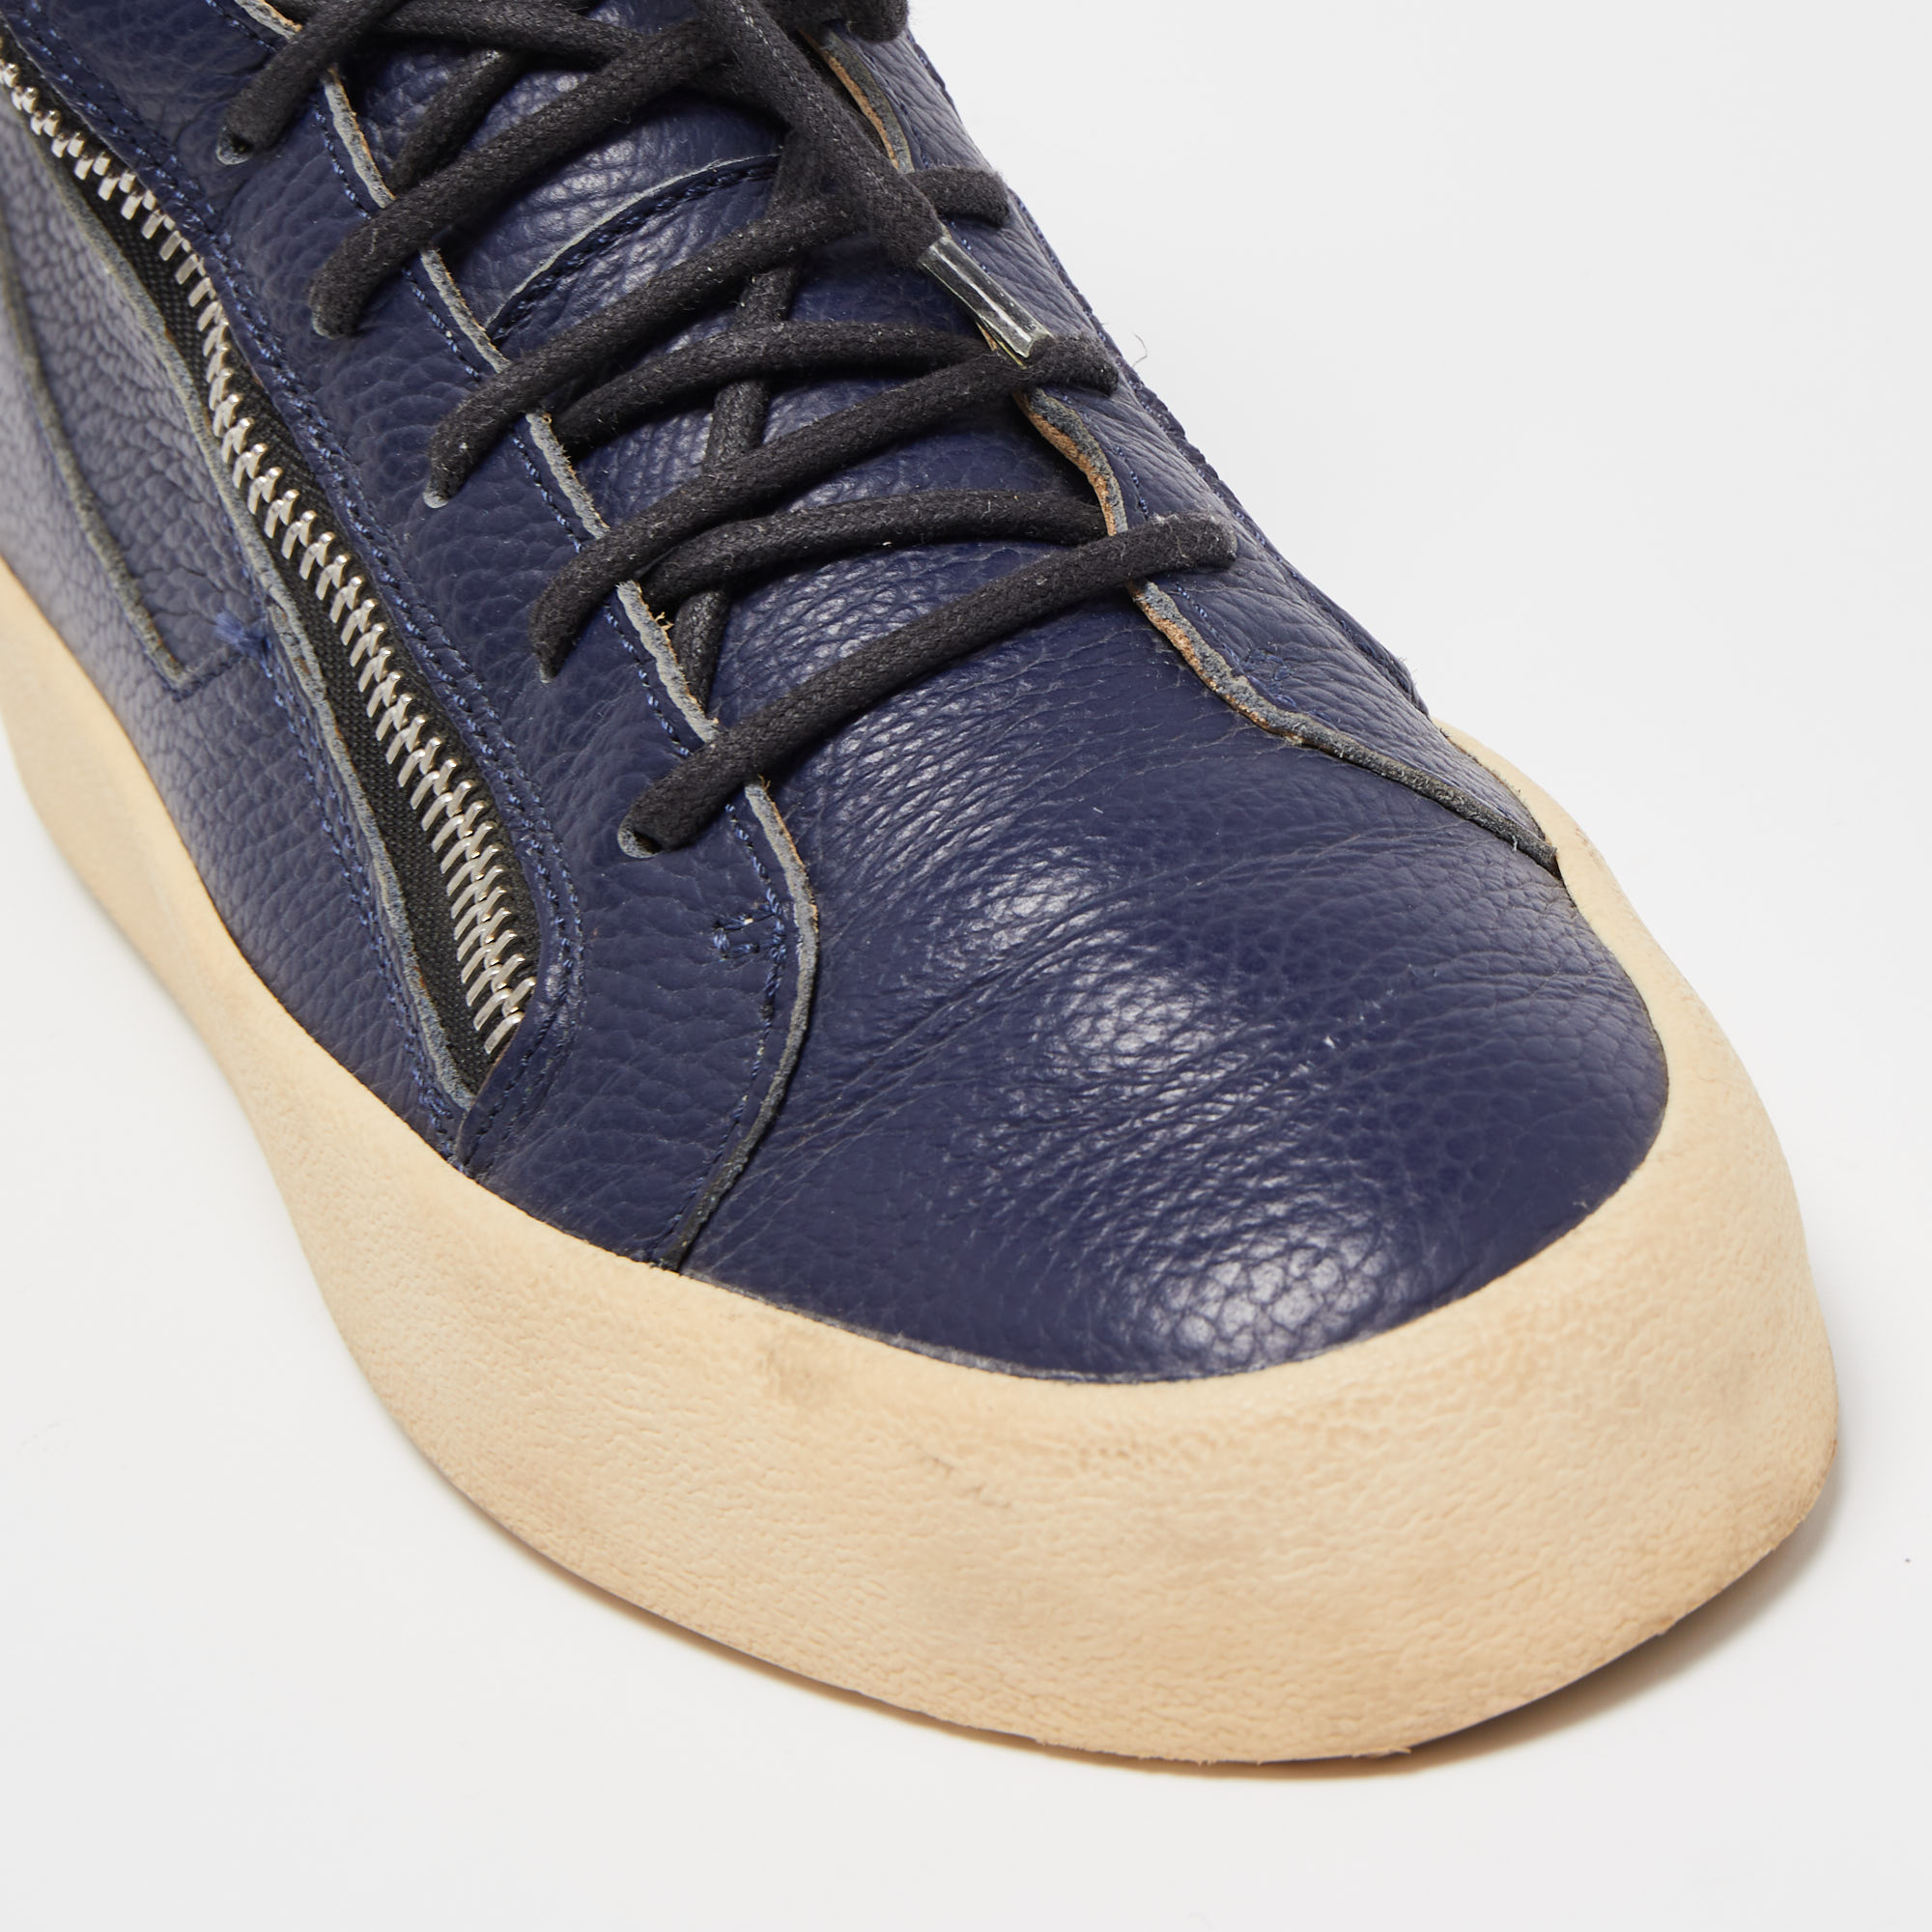 Giuseppe Zanotti Navy Blue Leather High Top Sneakers Size 43